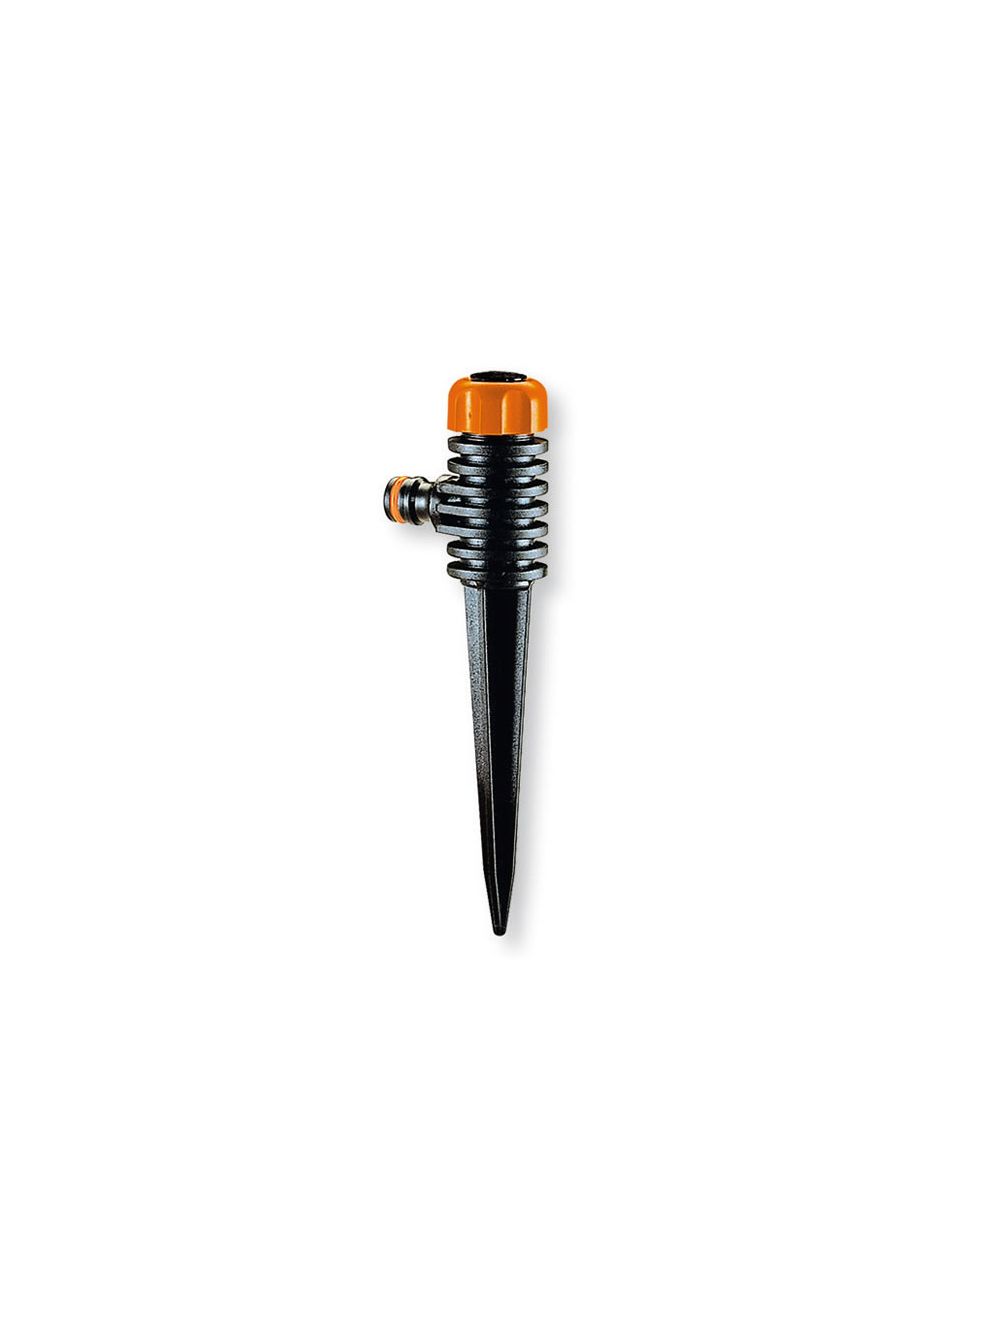 Claber Turbospike 8660